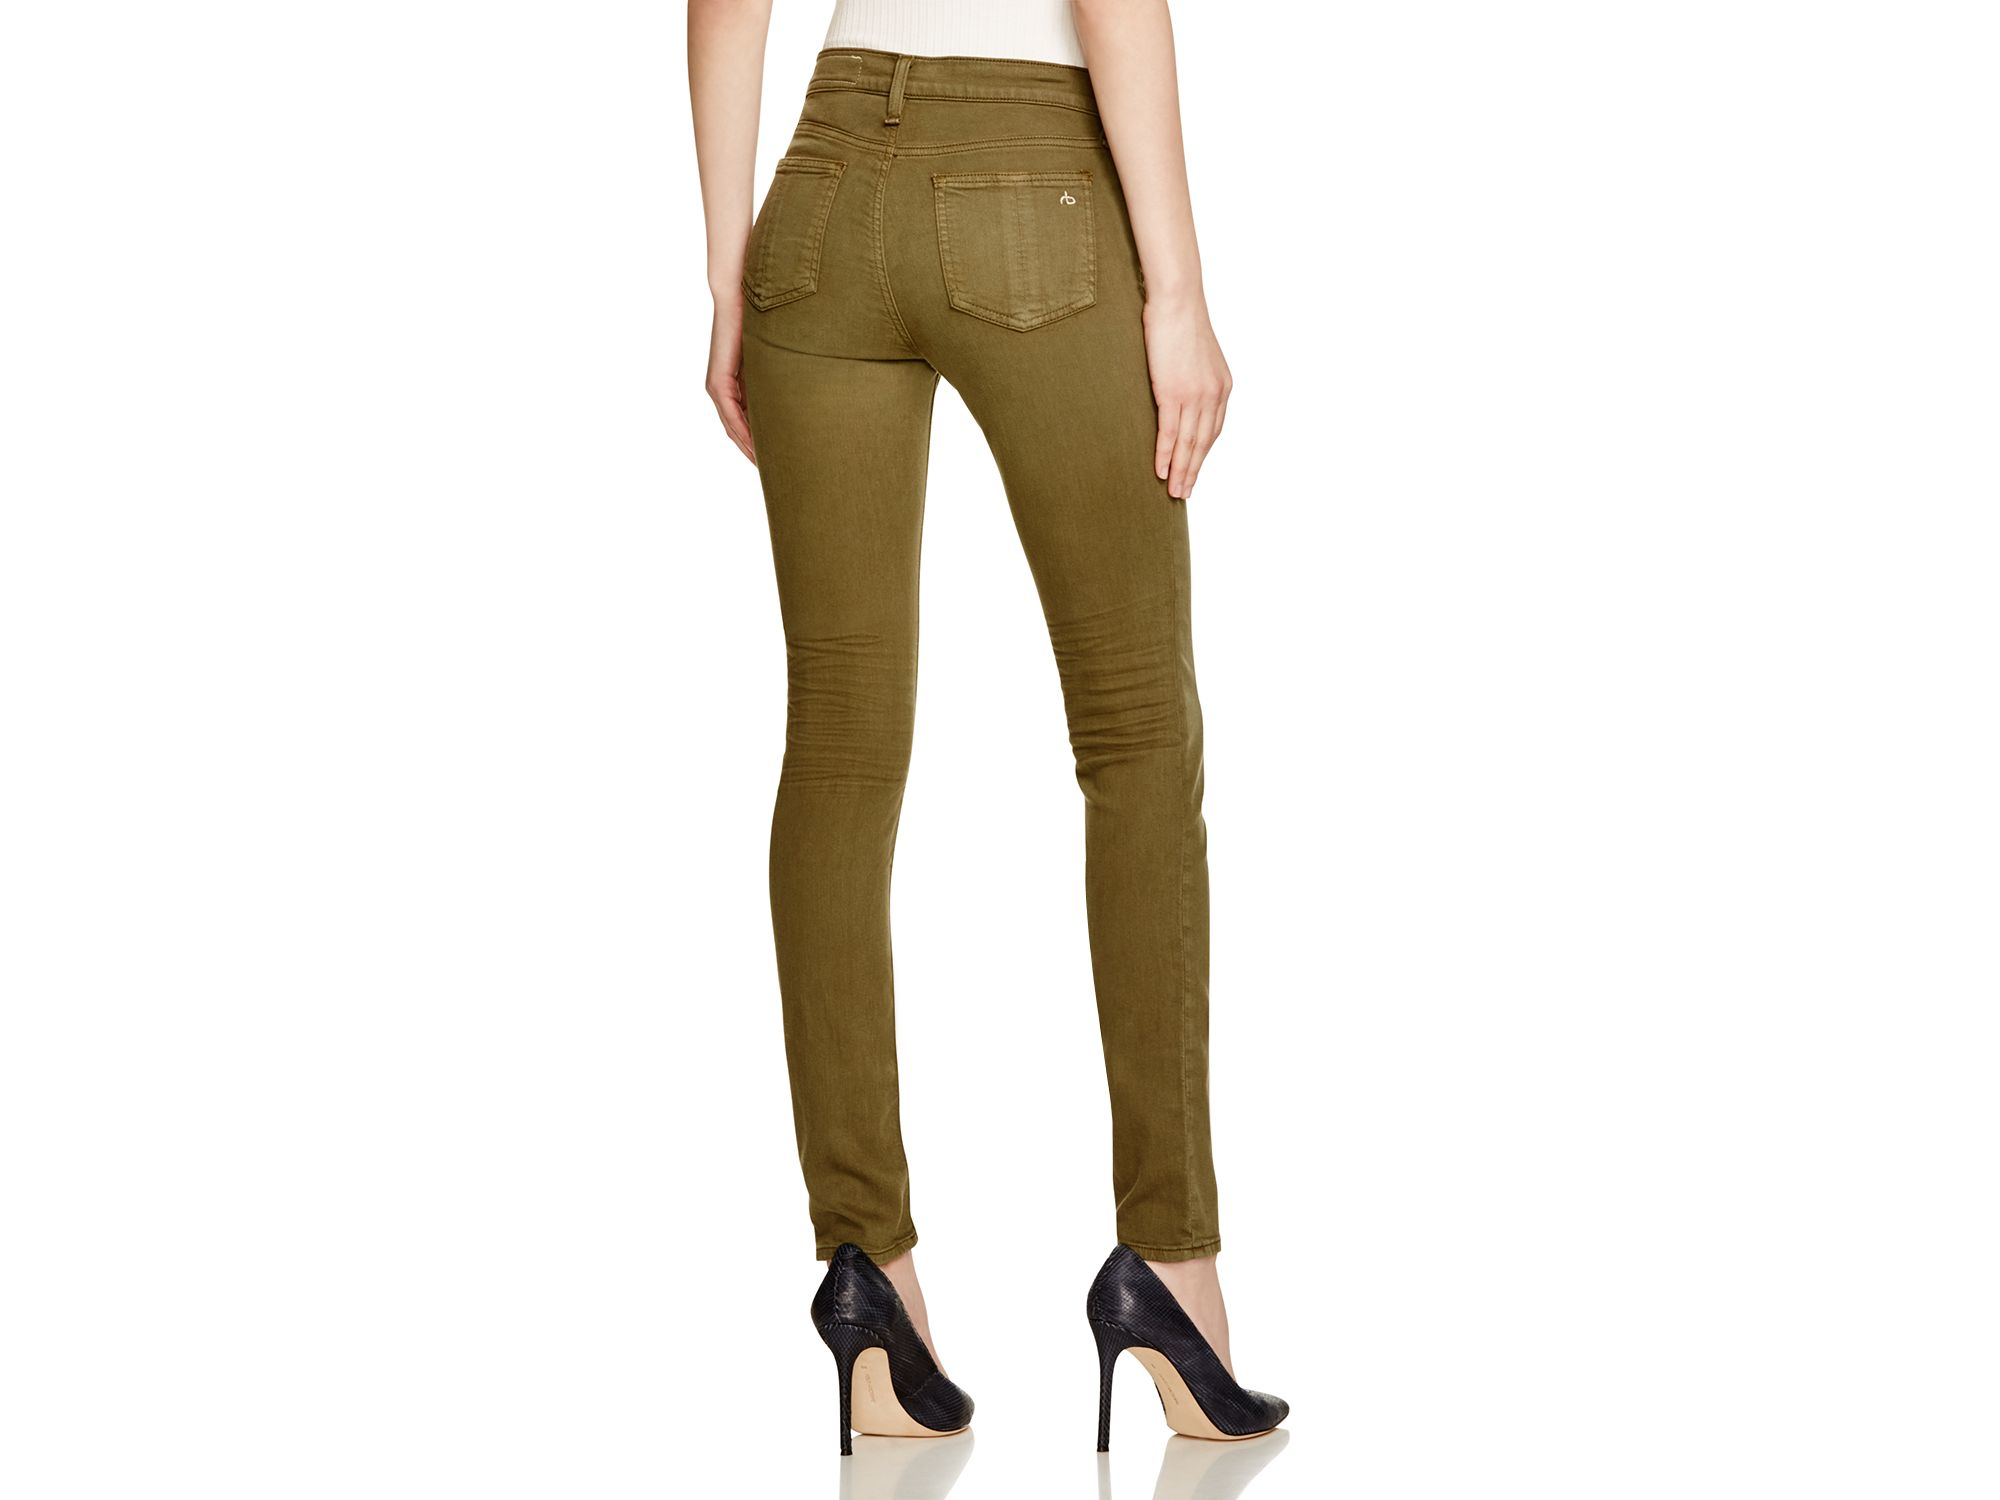 olive green skinny jeans womens